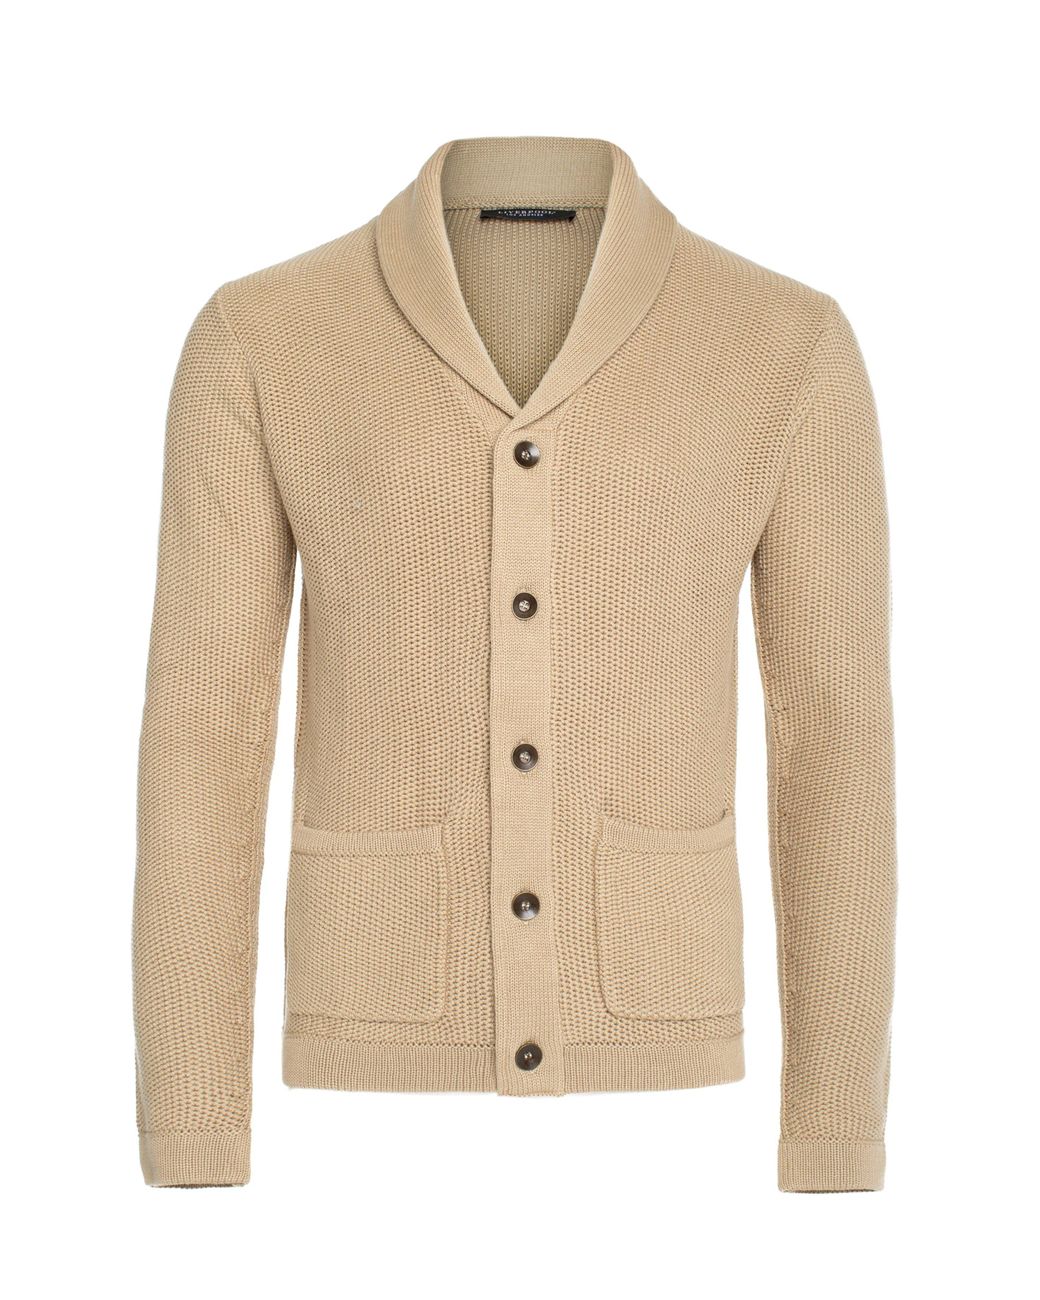 Liverpool Jeans Company Cotton Knit Cardigan in Khaki (Natural) for Men ...